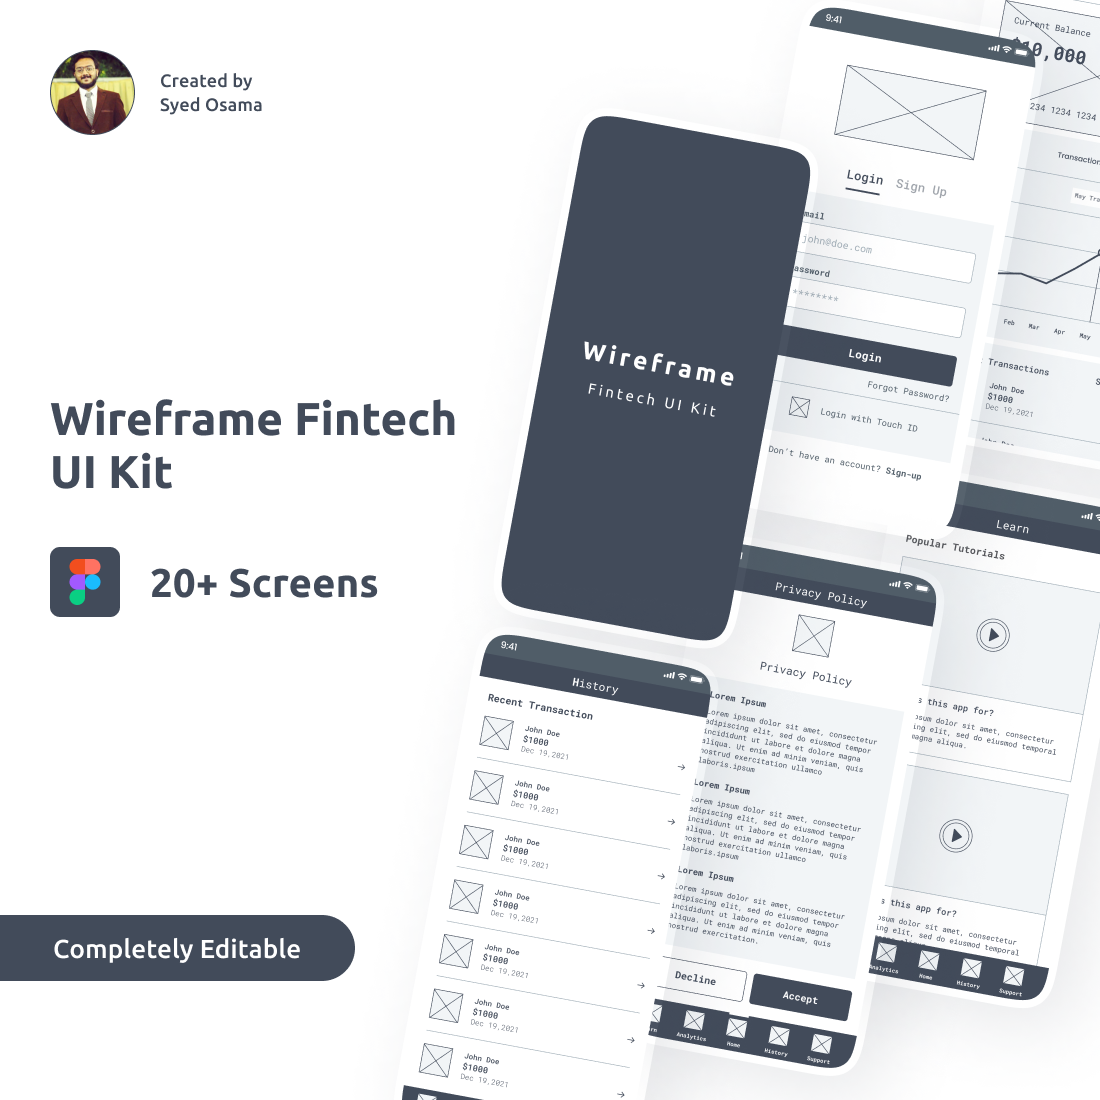 Fintech Wireframe UI Kit cover image.